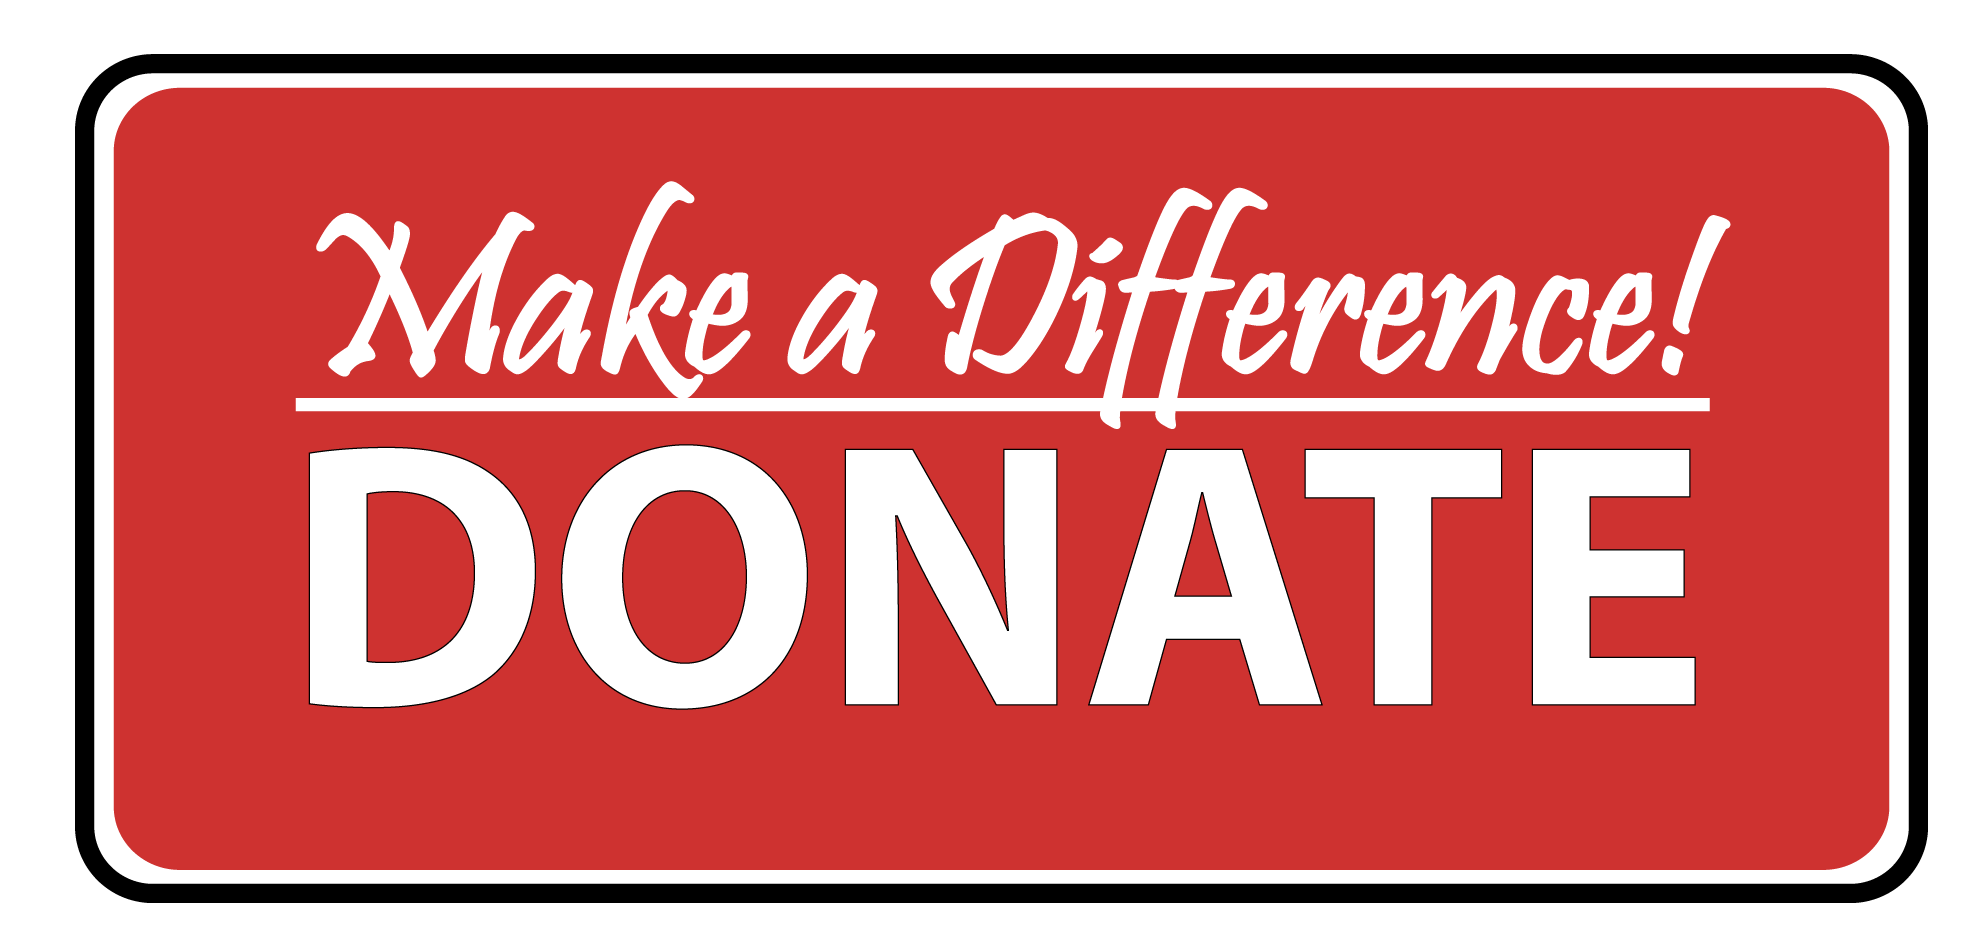 Donate please Free Stock Photos, Images, and Pictures of Donate please